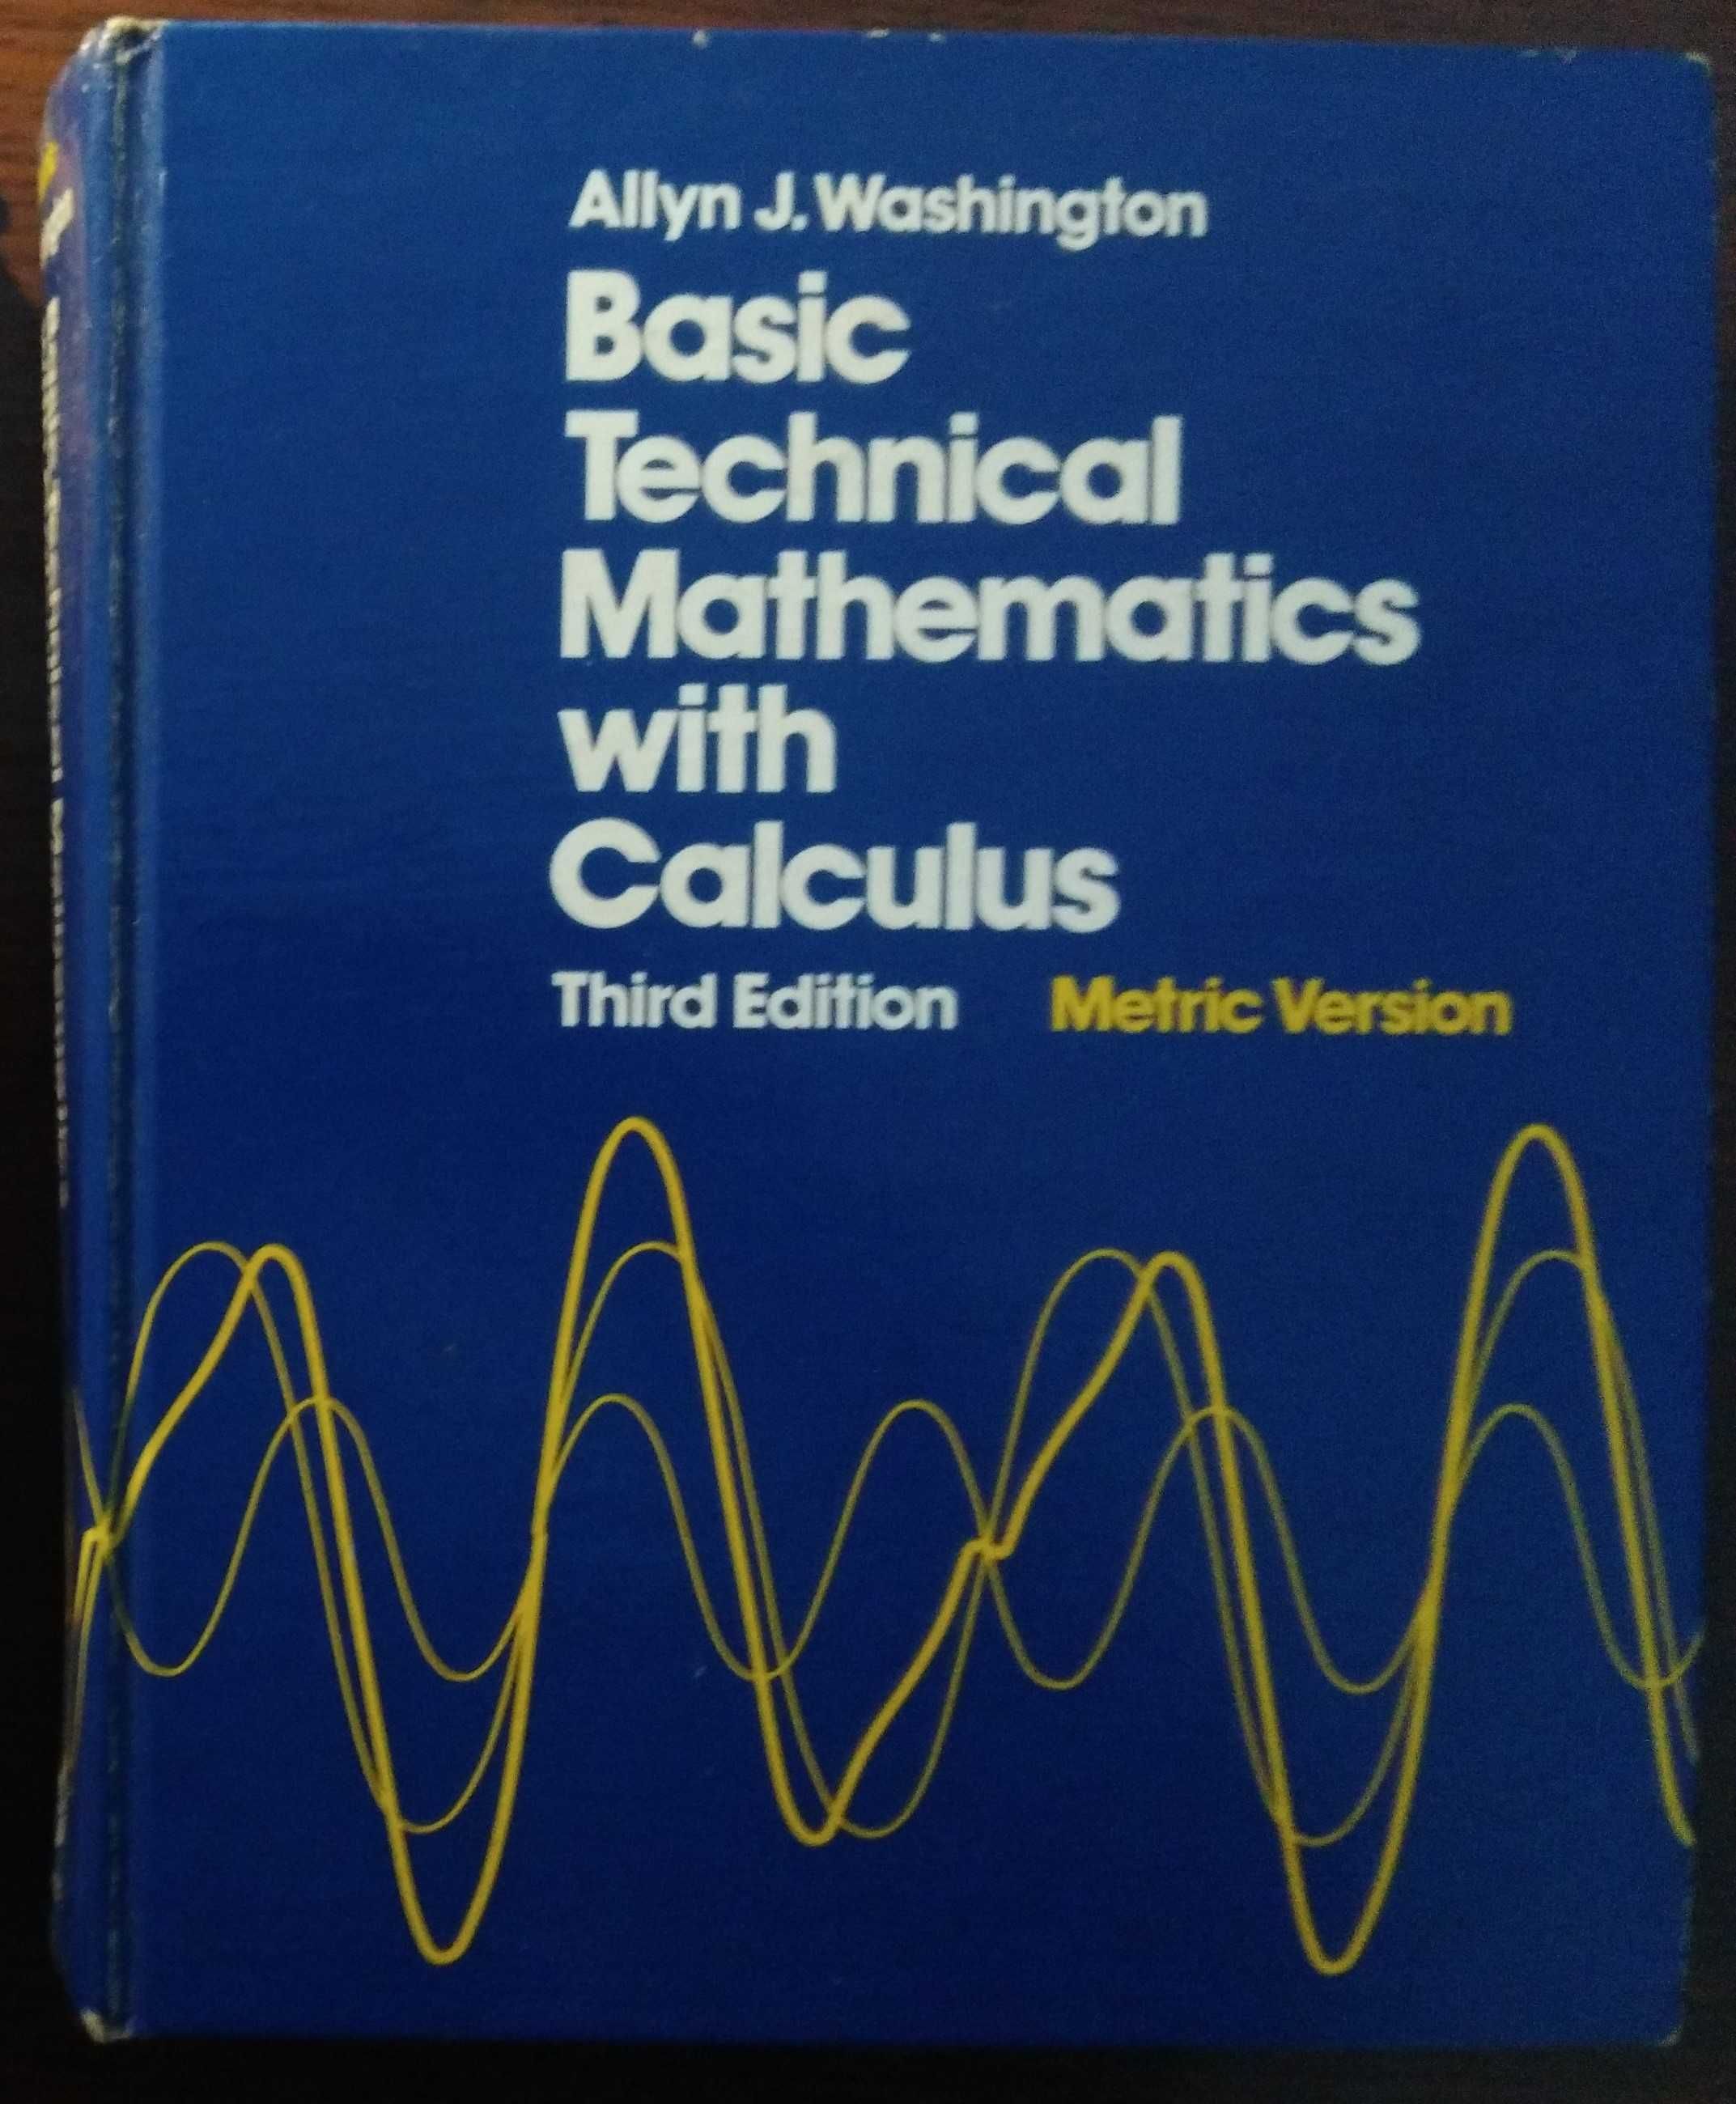 Basic Technical Mathematics with Calculus - 3 Edition - Metric Version